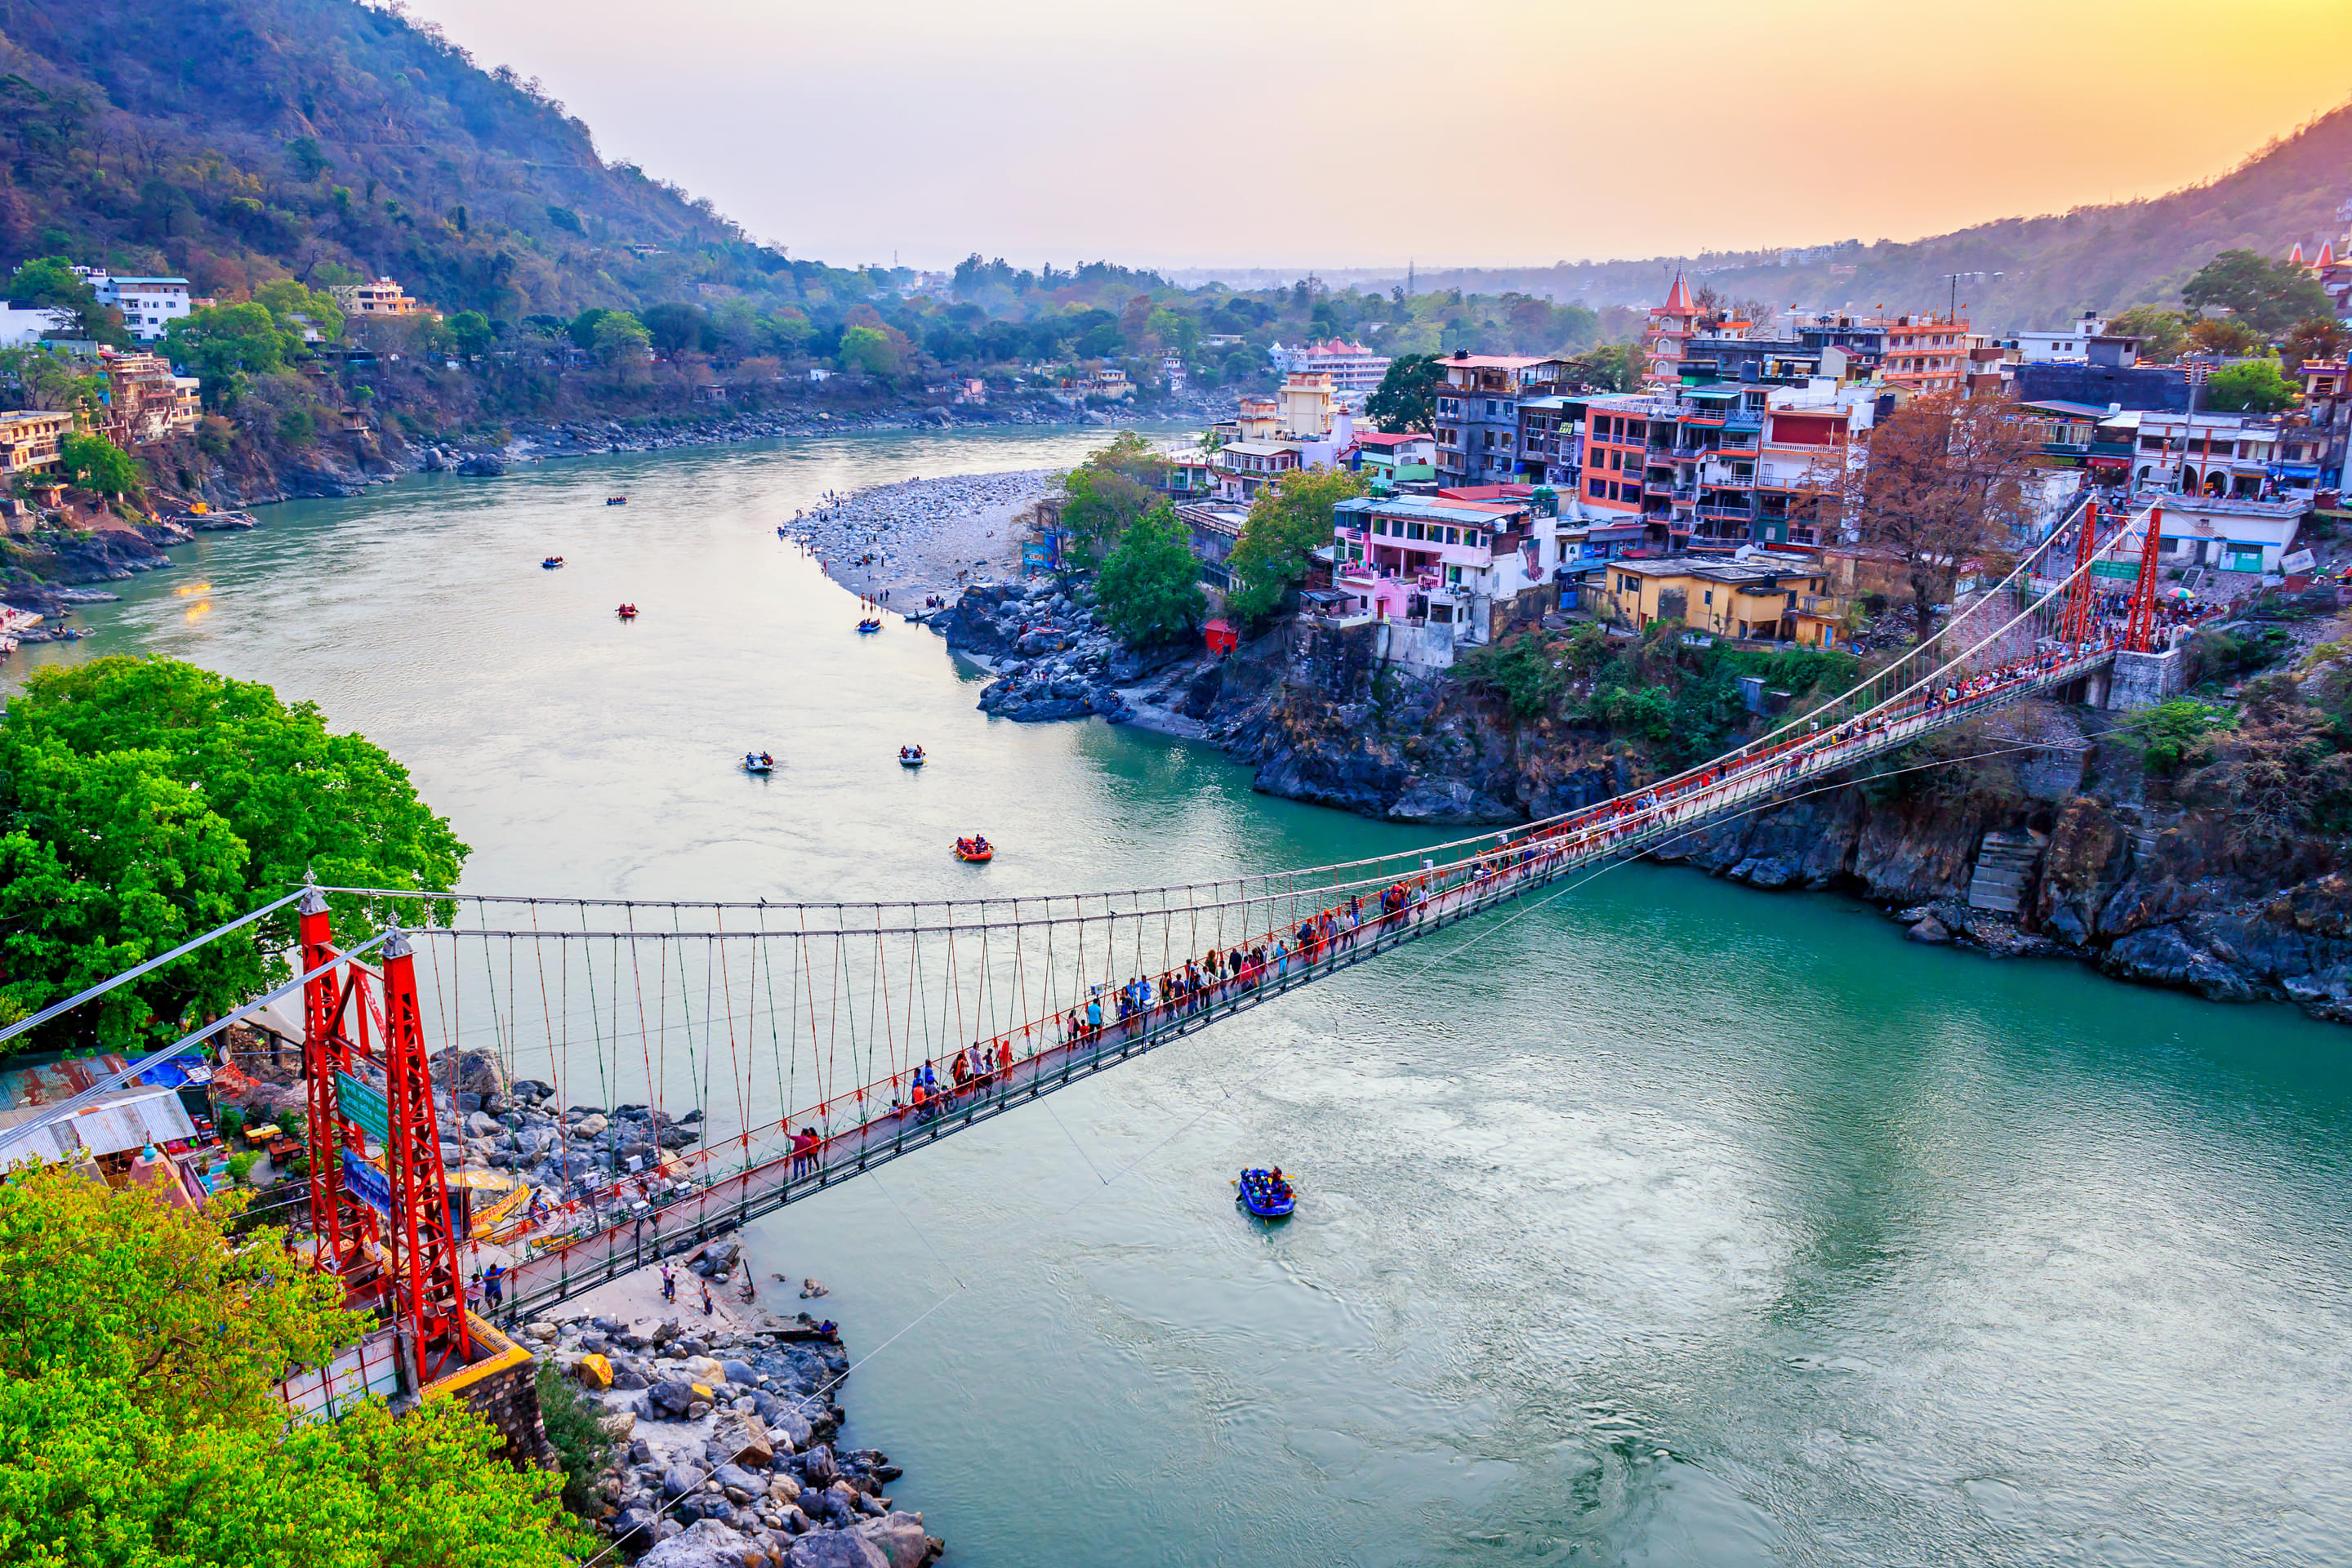 Ram Jhula Overview